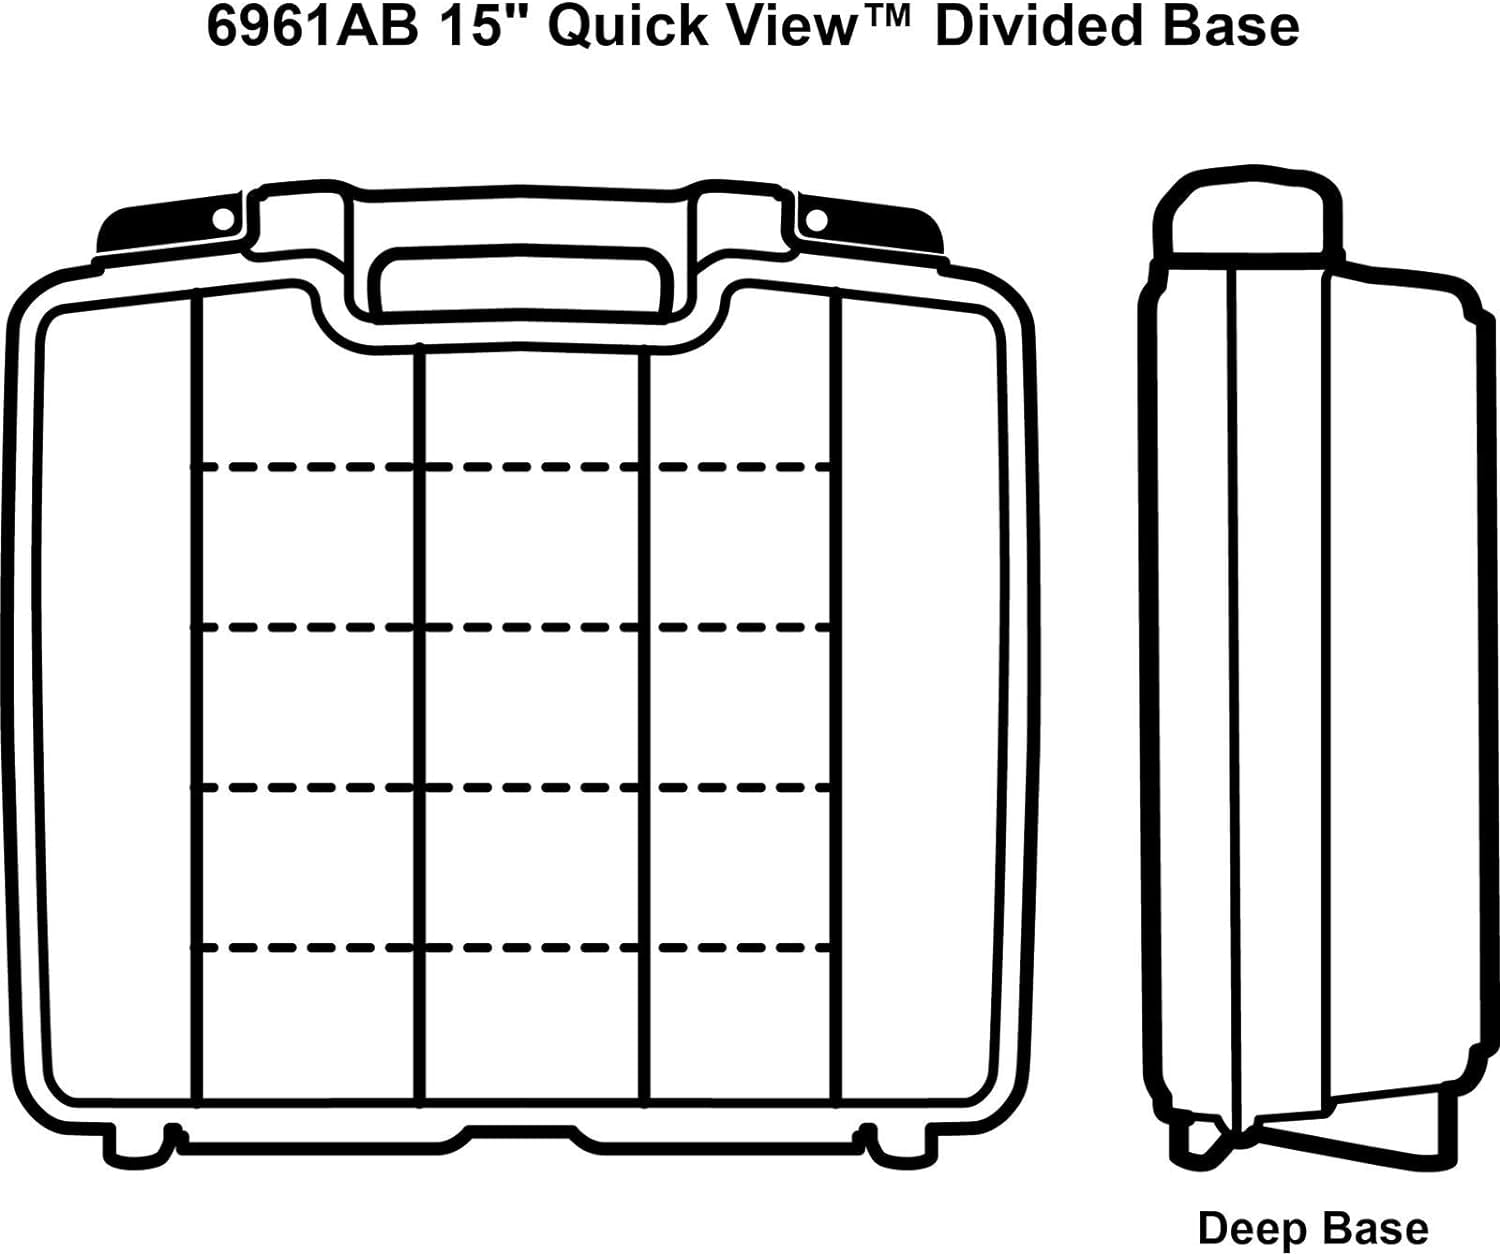  ArtBin 6977AB 12 inch Quick View Deep Base Carrying Case,  Portable Art & Craft Organizer with Handle, [1] Plastic Storage Case,  Translucent